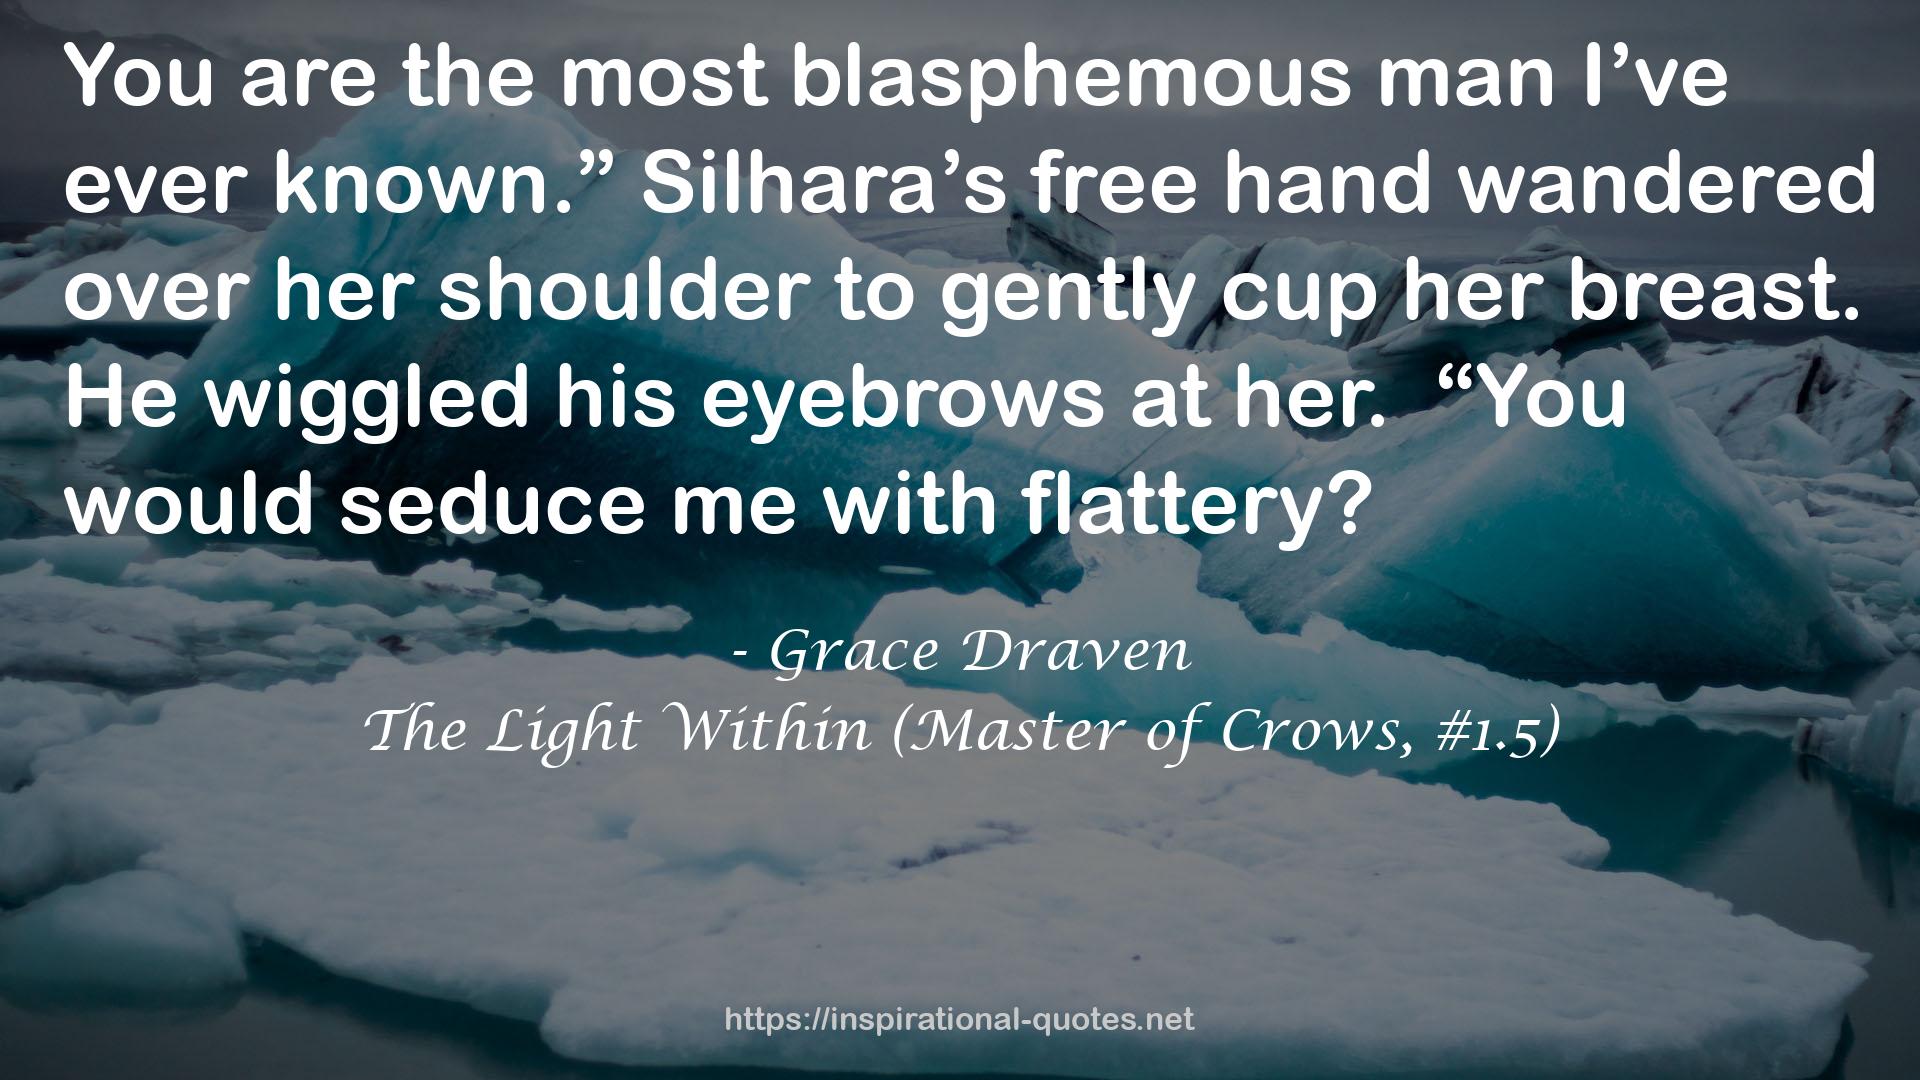 The Light Within (Master of Crows, #1.5) QUOTES